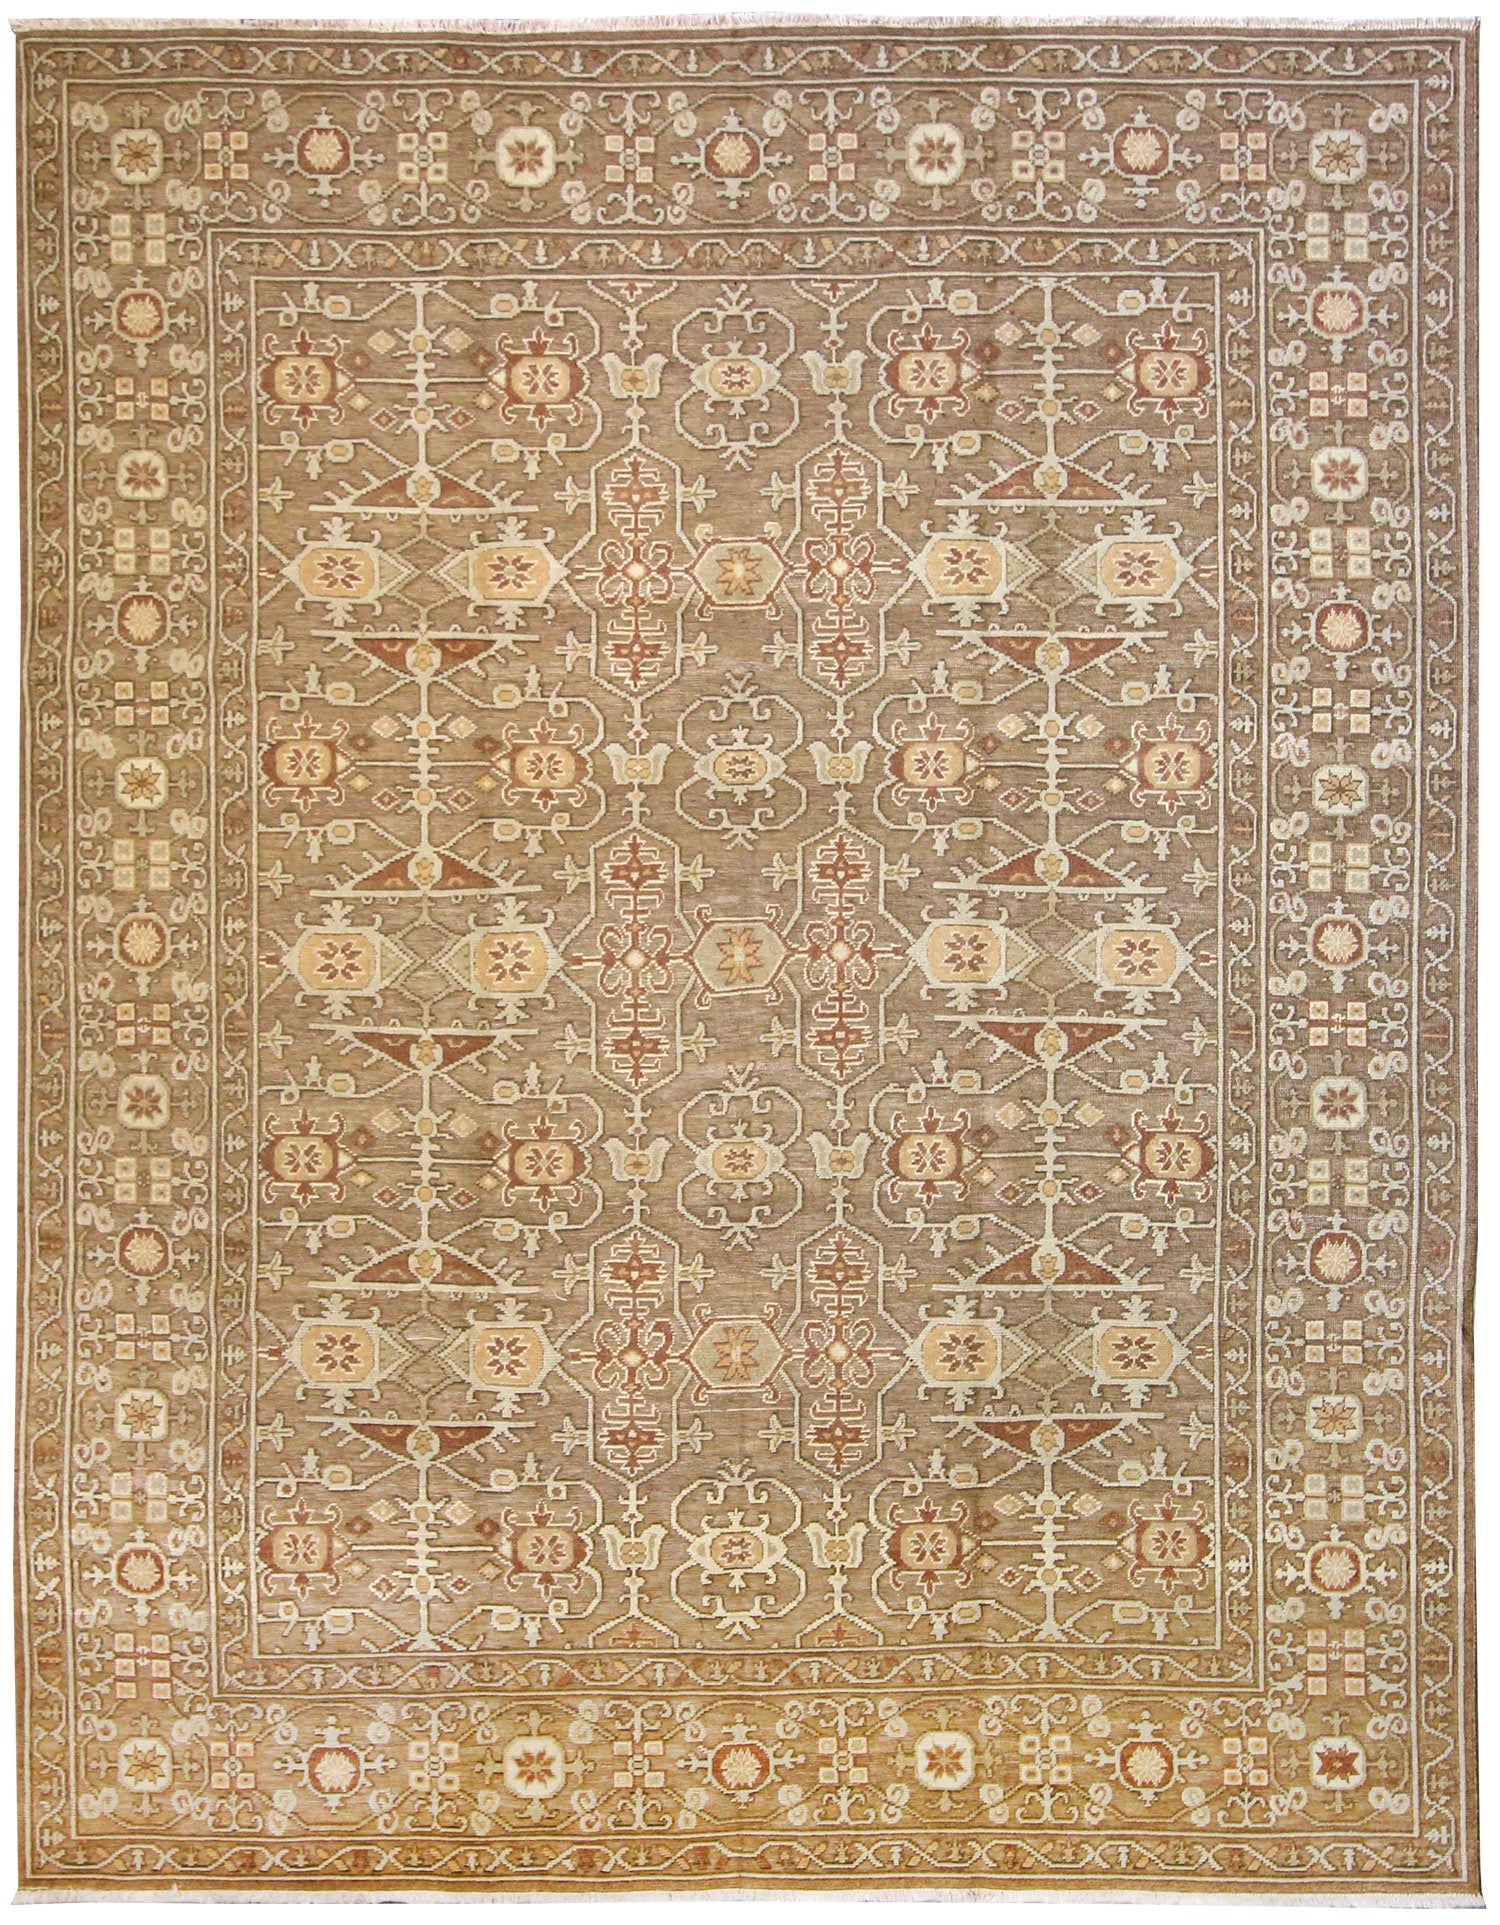 Spanish Cuenca Handwoven Traditional Rug